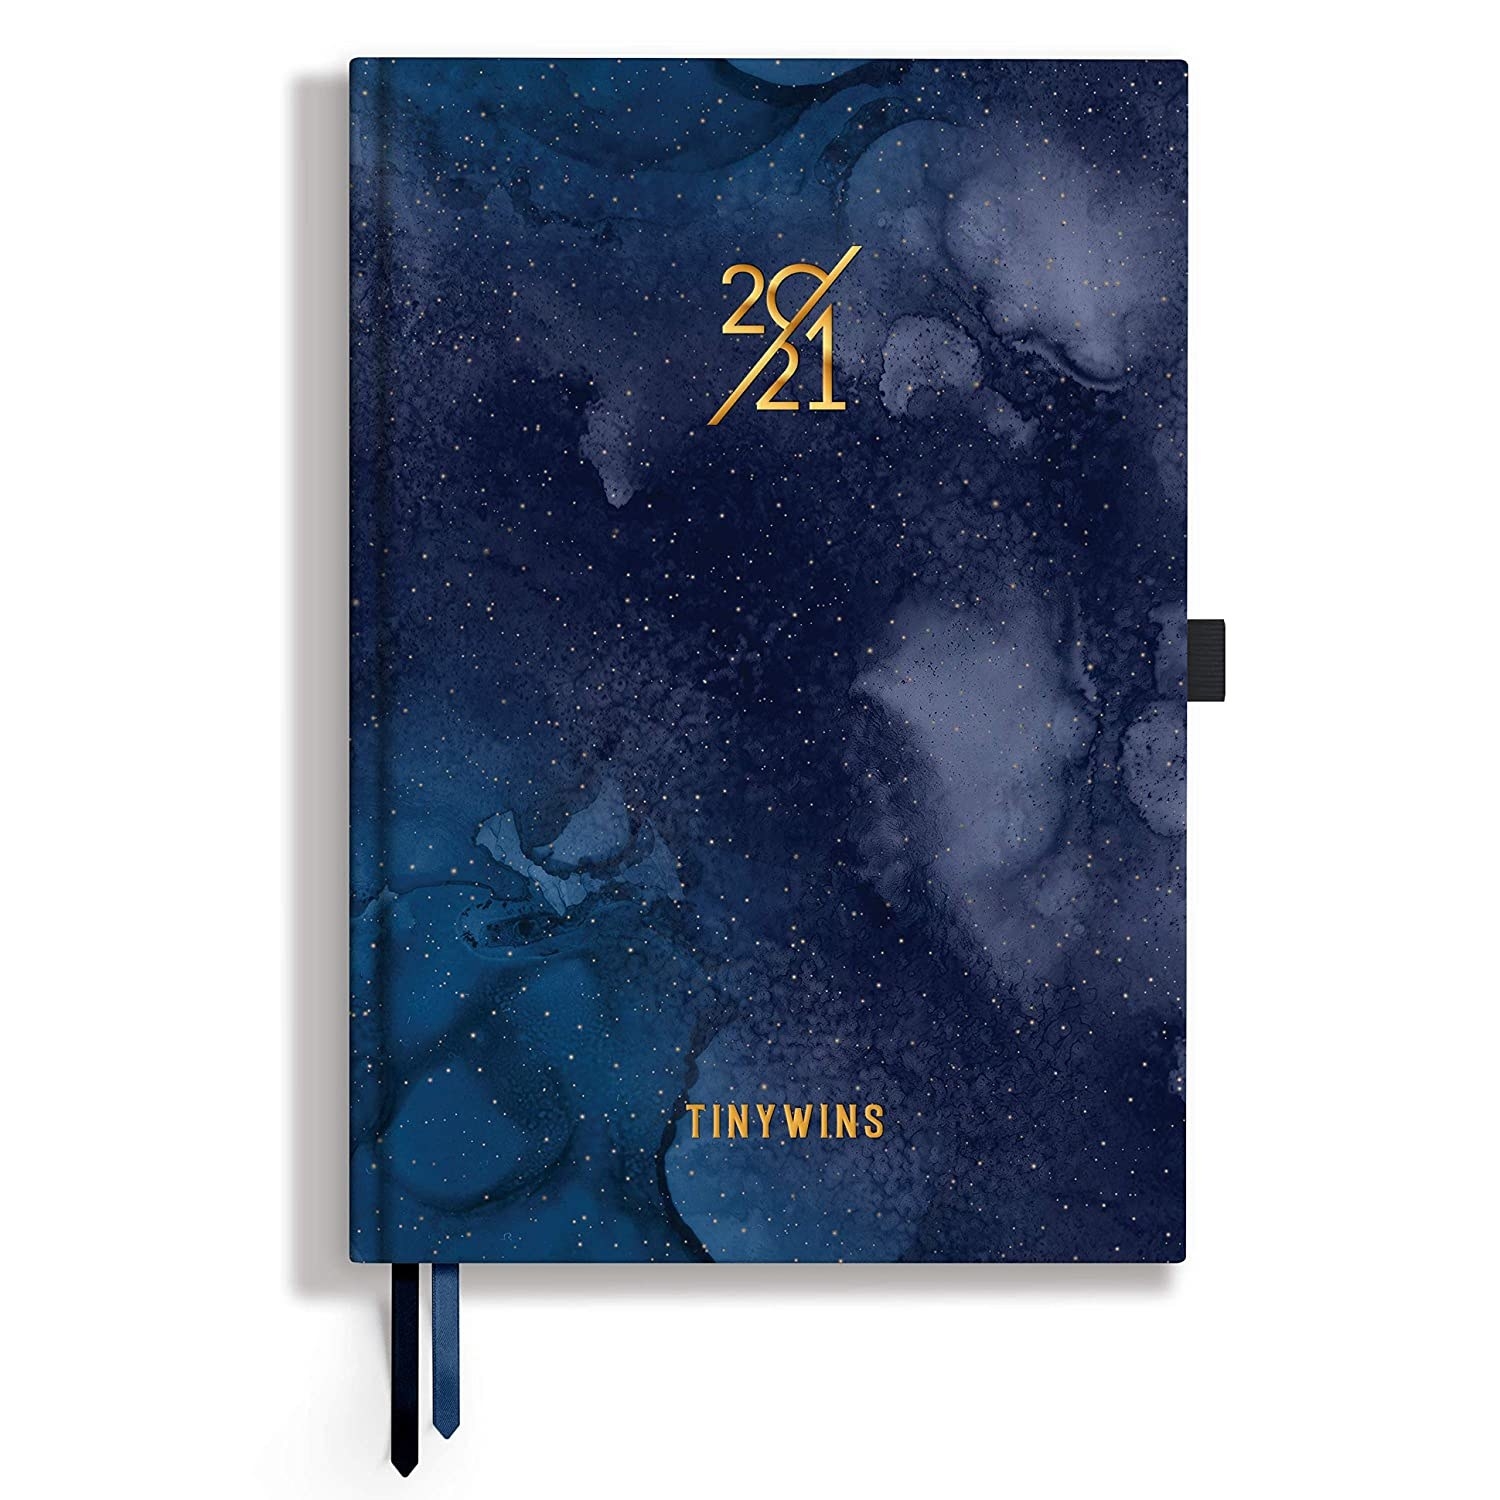 A navy blue planner with a night sky like pattern and white speckles on it. It has the text 2021 and Tiny Wins embossed in gold on it.